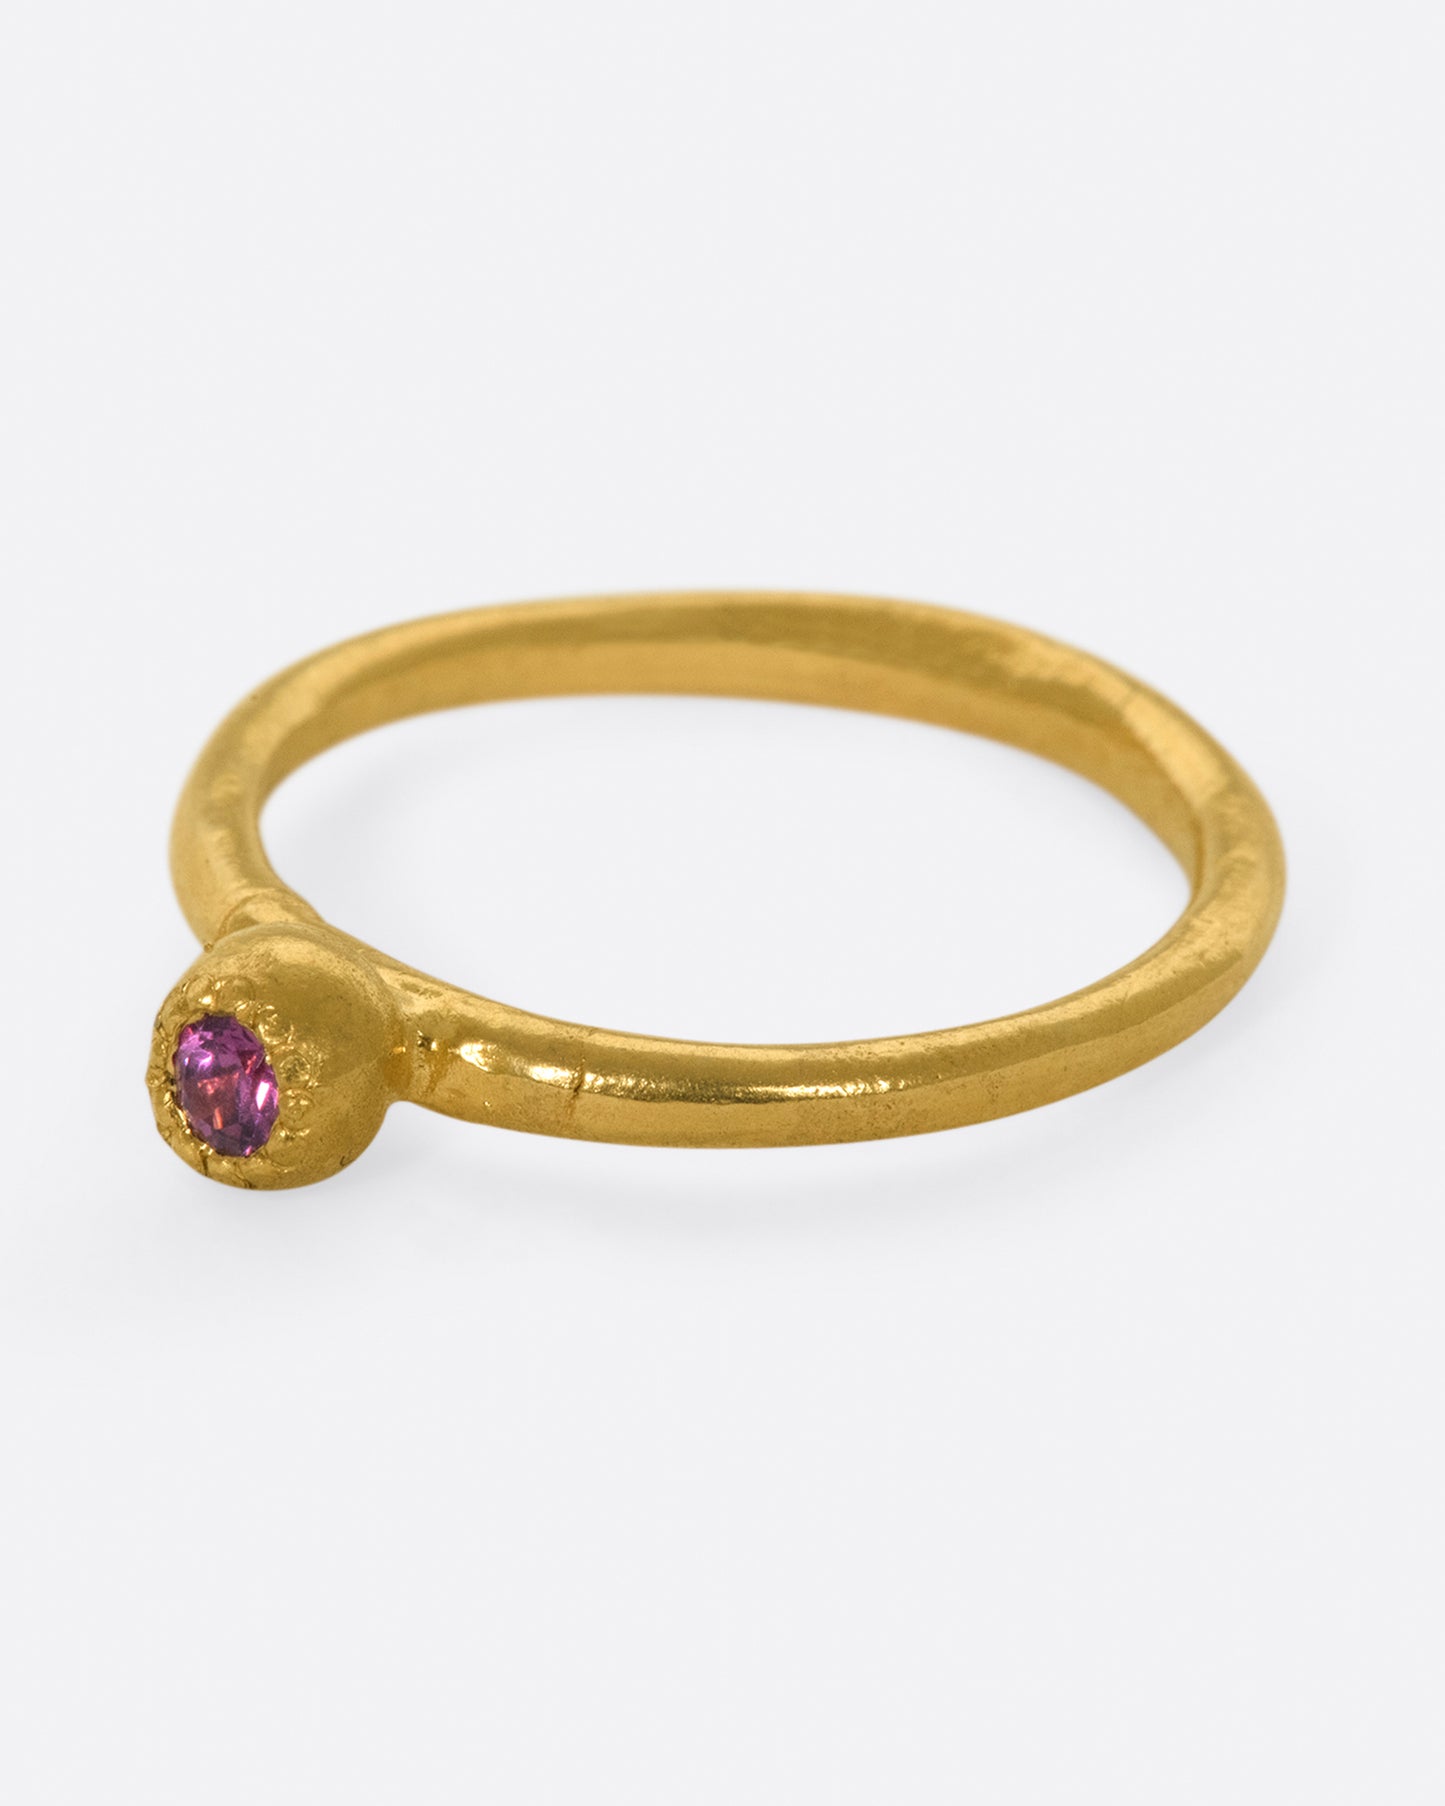 A high karat gold solitaire ring with a rosy pink tourmaline at its center.